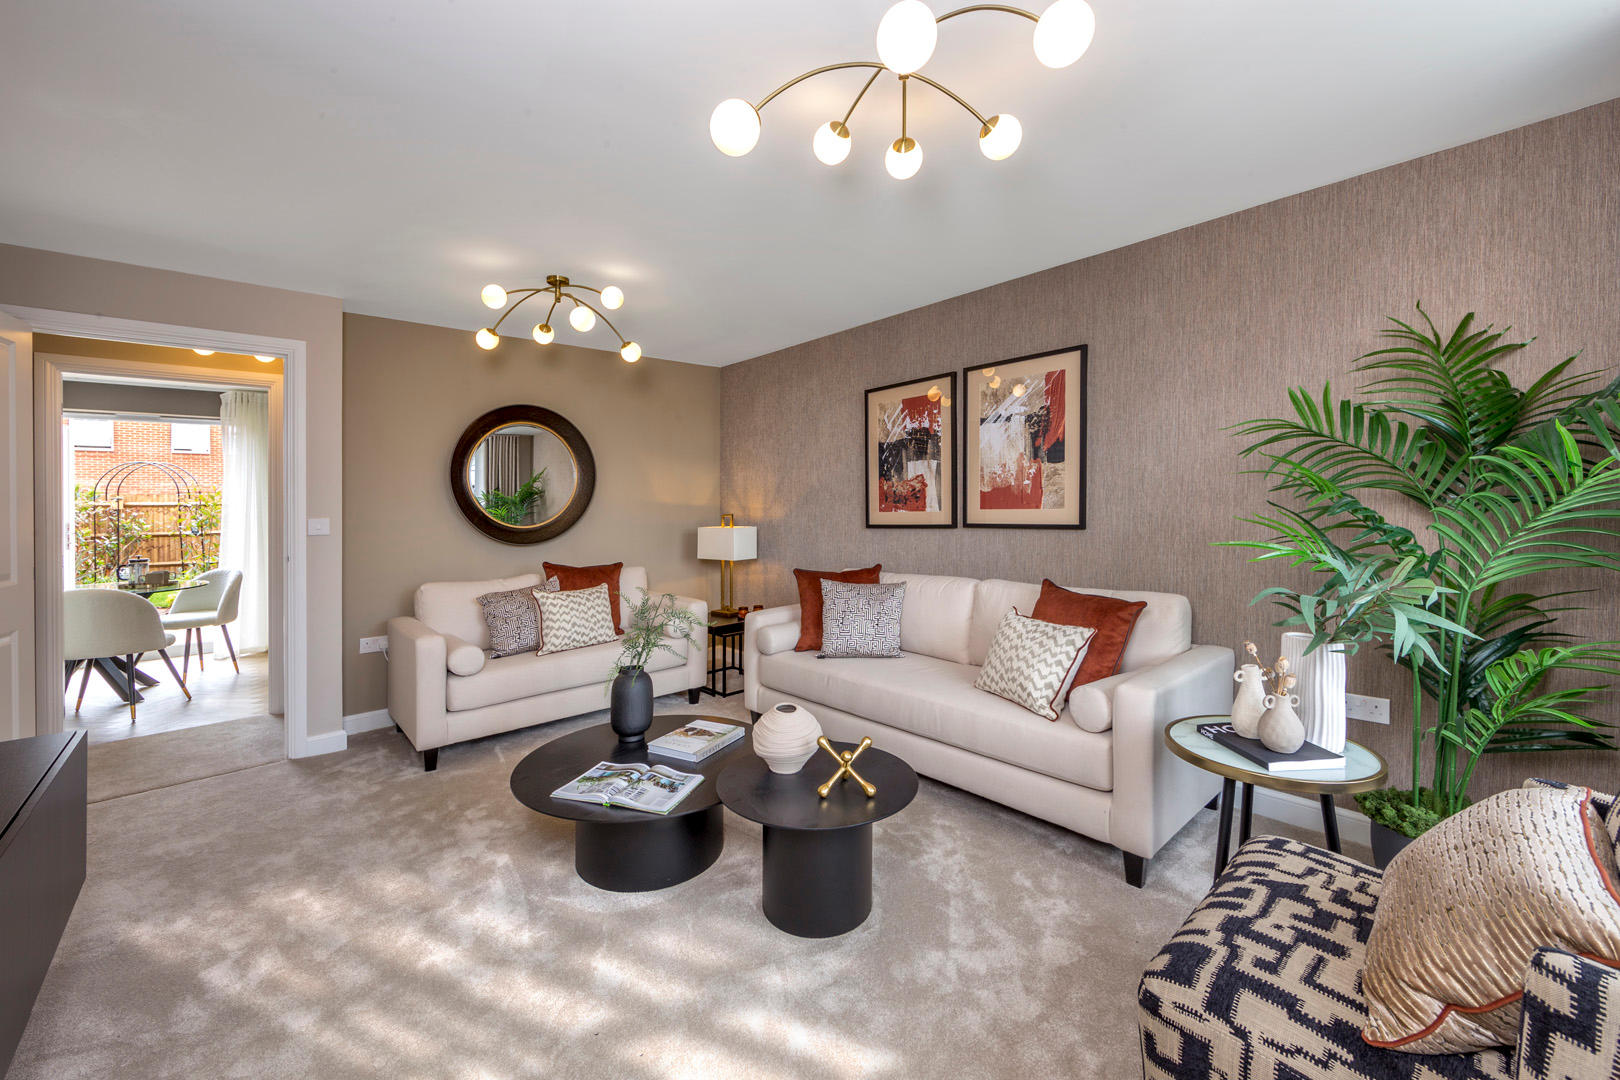 Images David Wilson Homes - The Woodlands